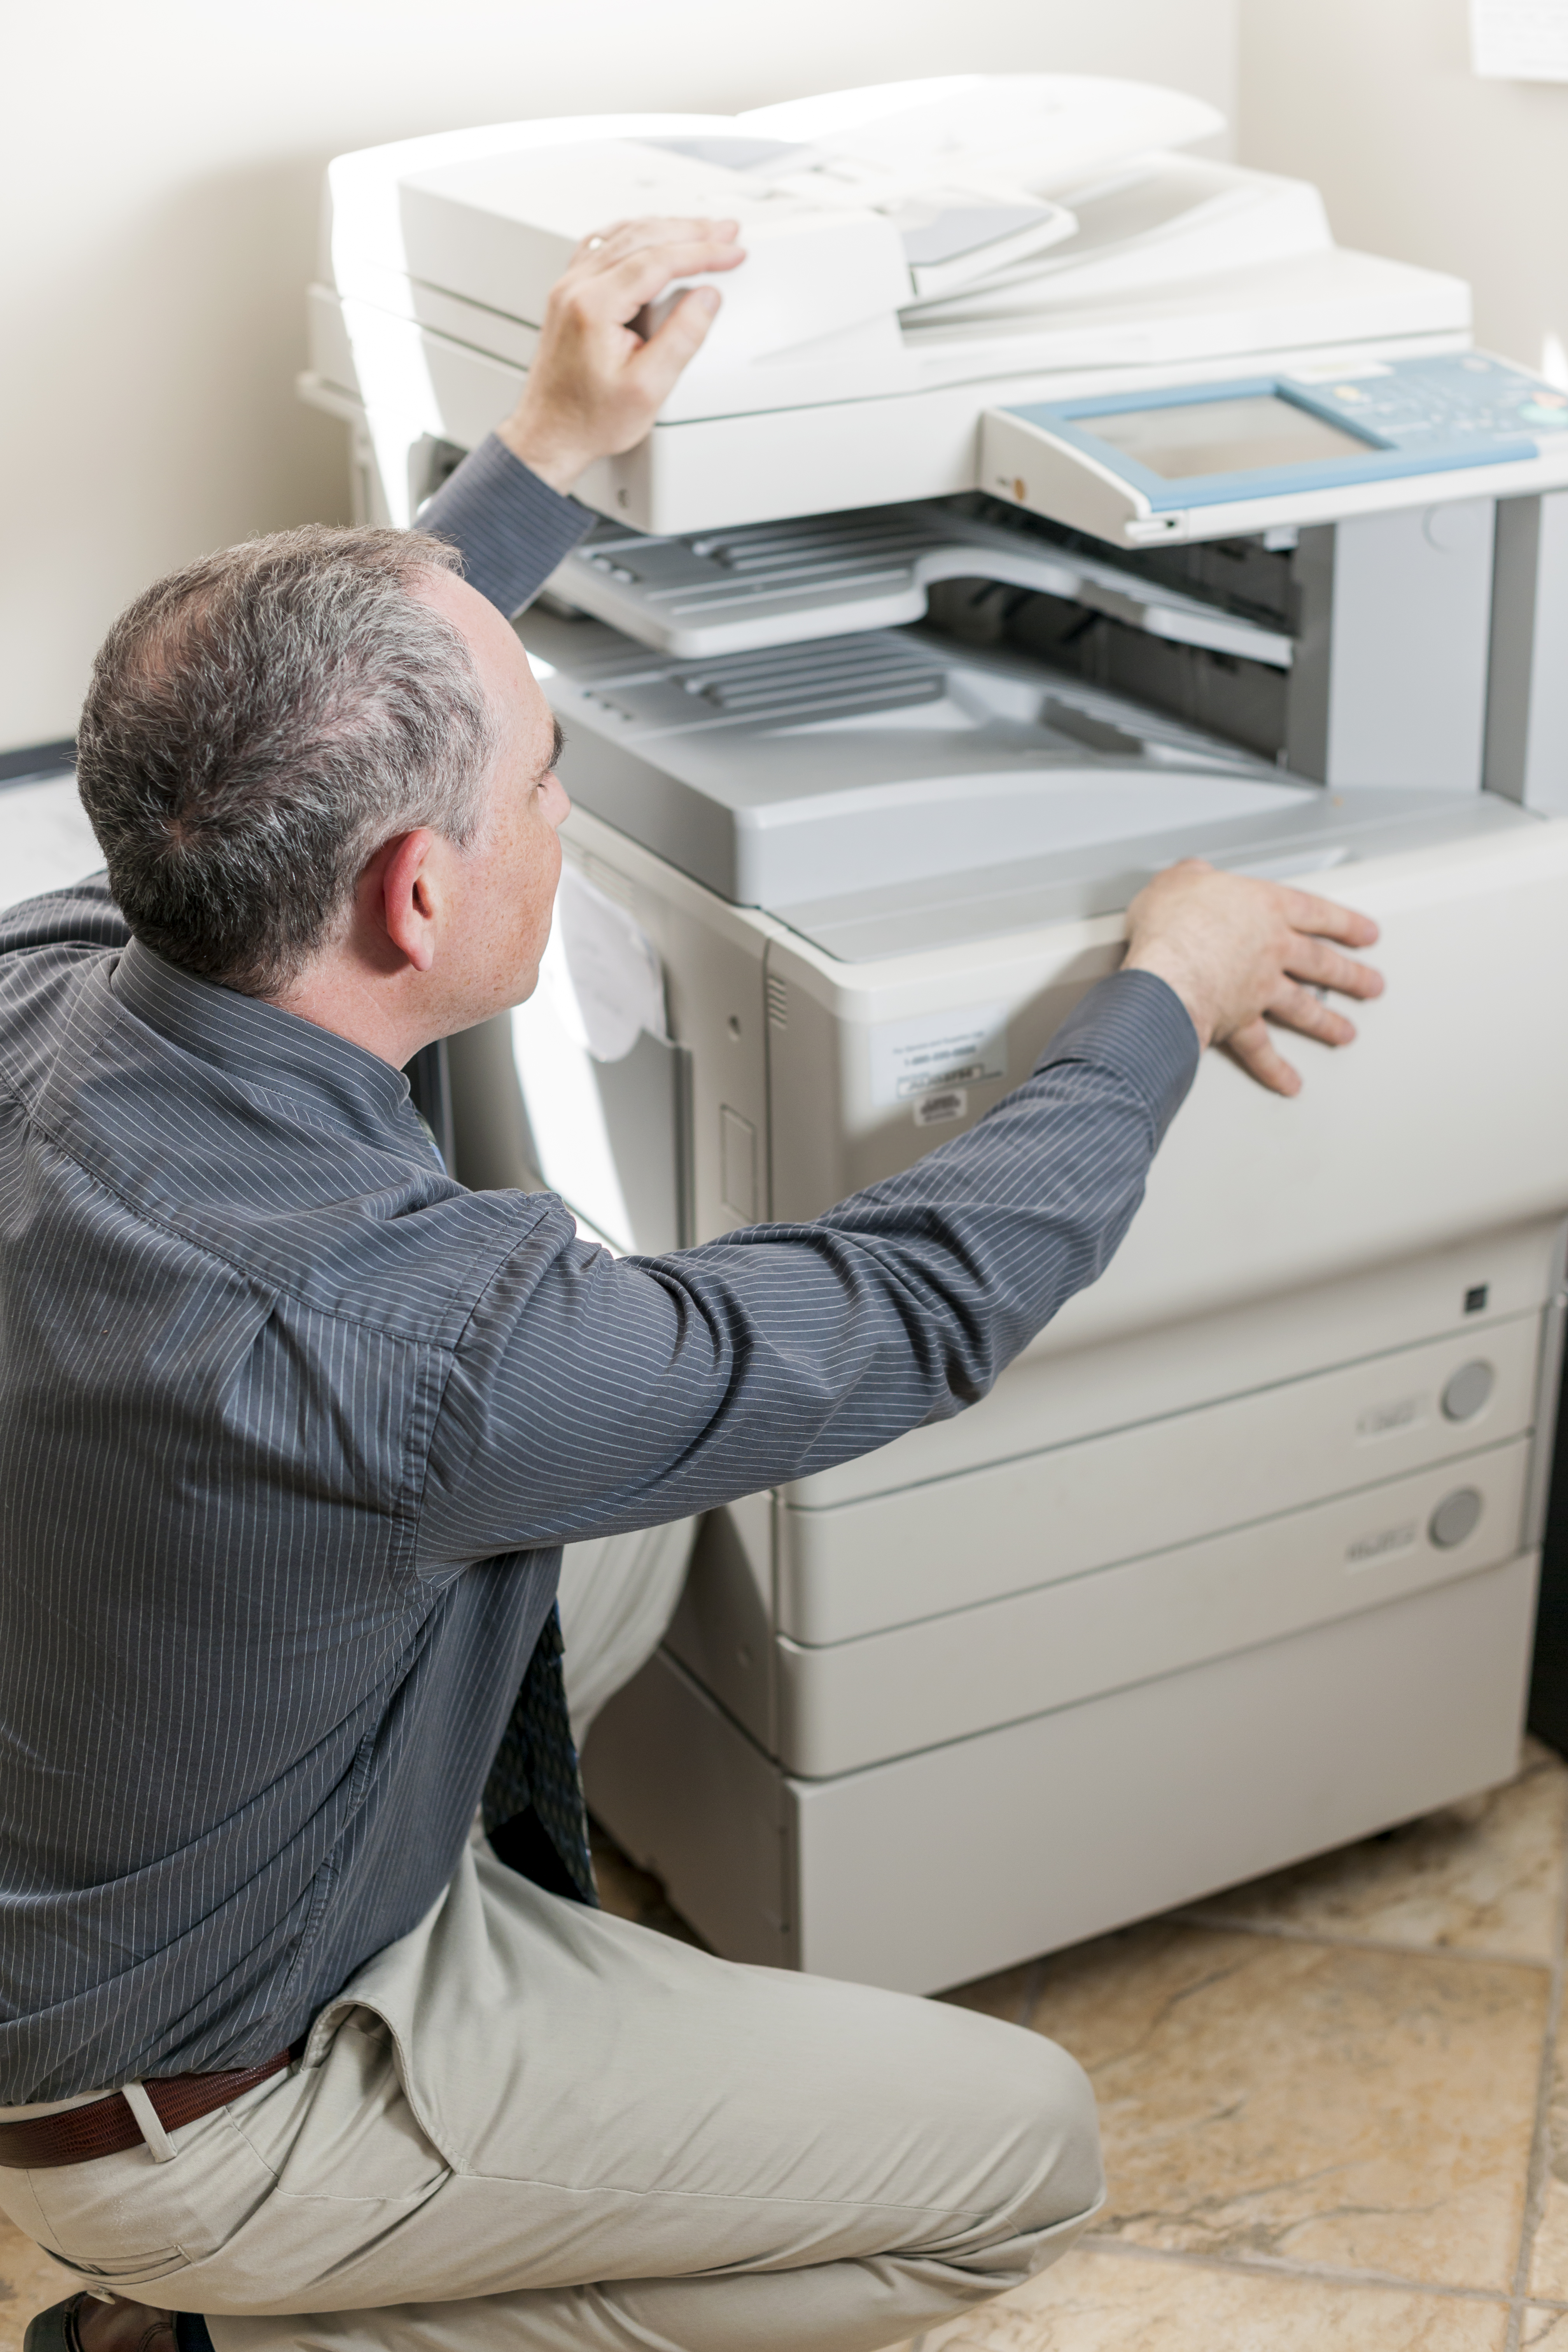 Fix Your Printer In Charleston With The Office People. Call us at 843-769-7774